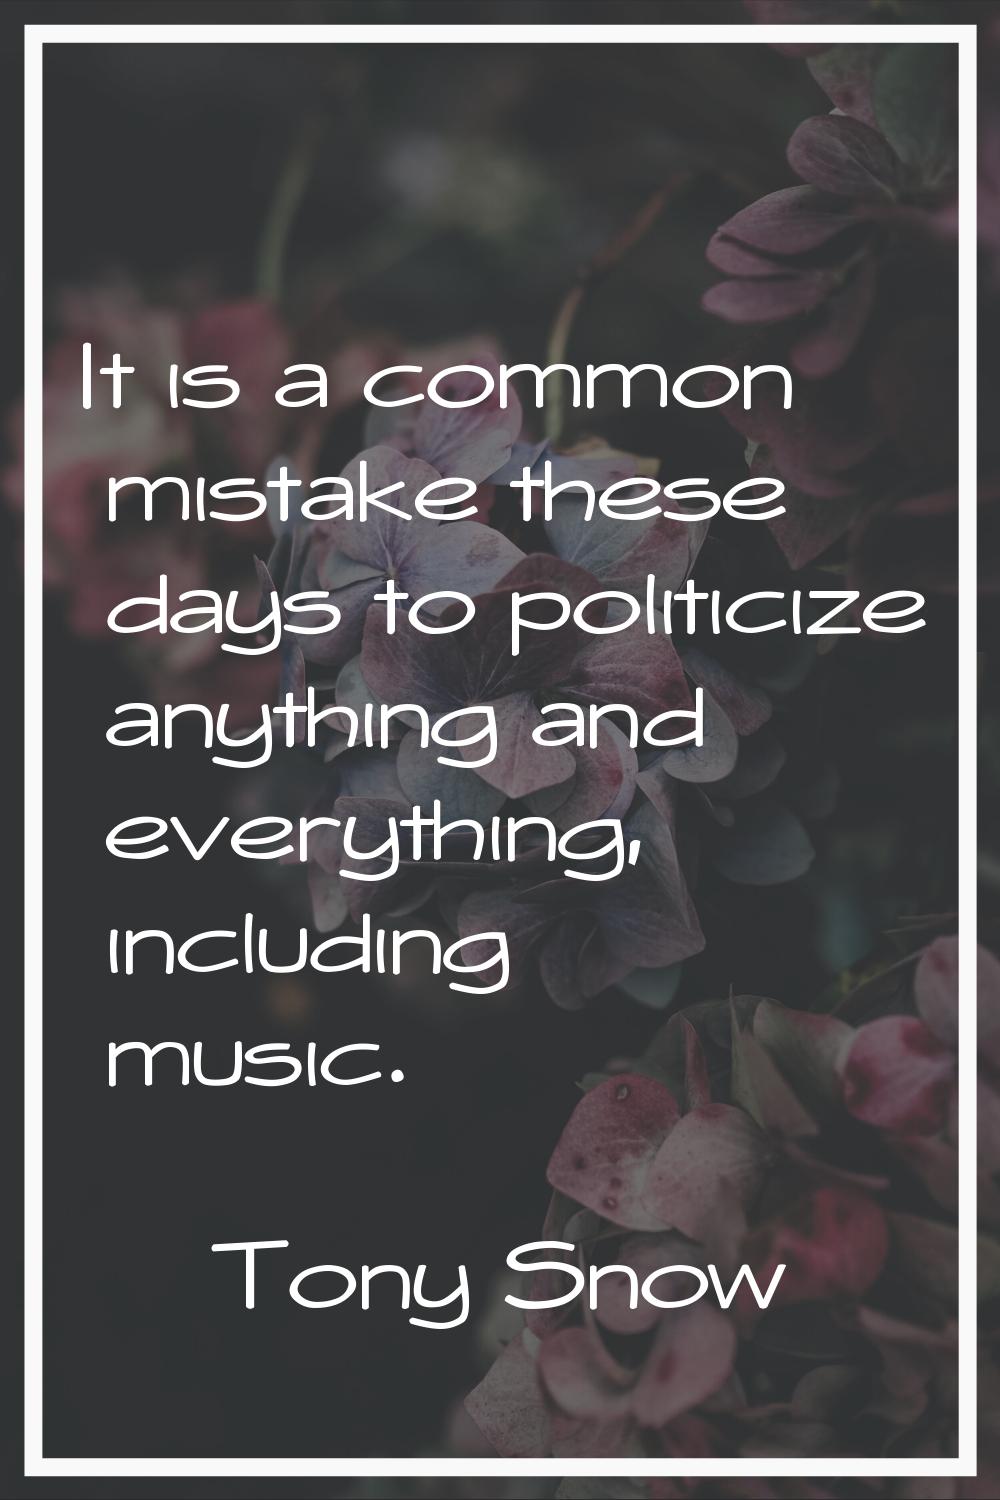 It is a common mistake these days to politicize anything and everything, including music.